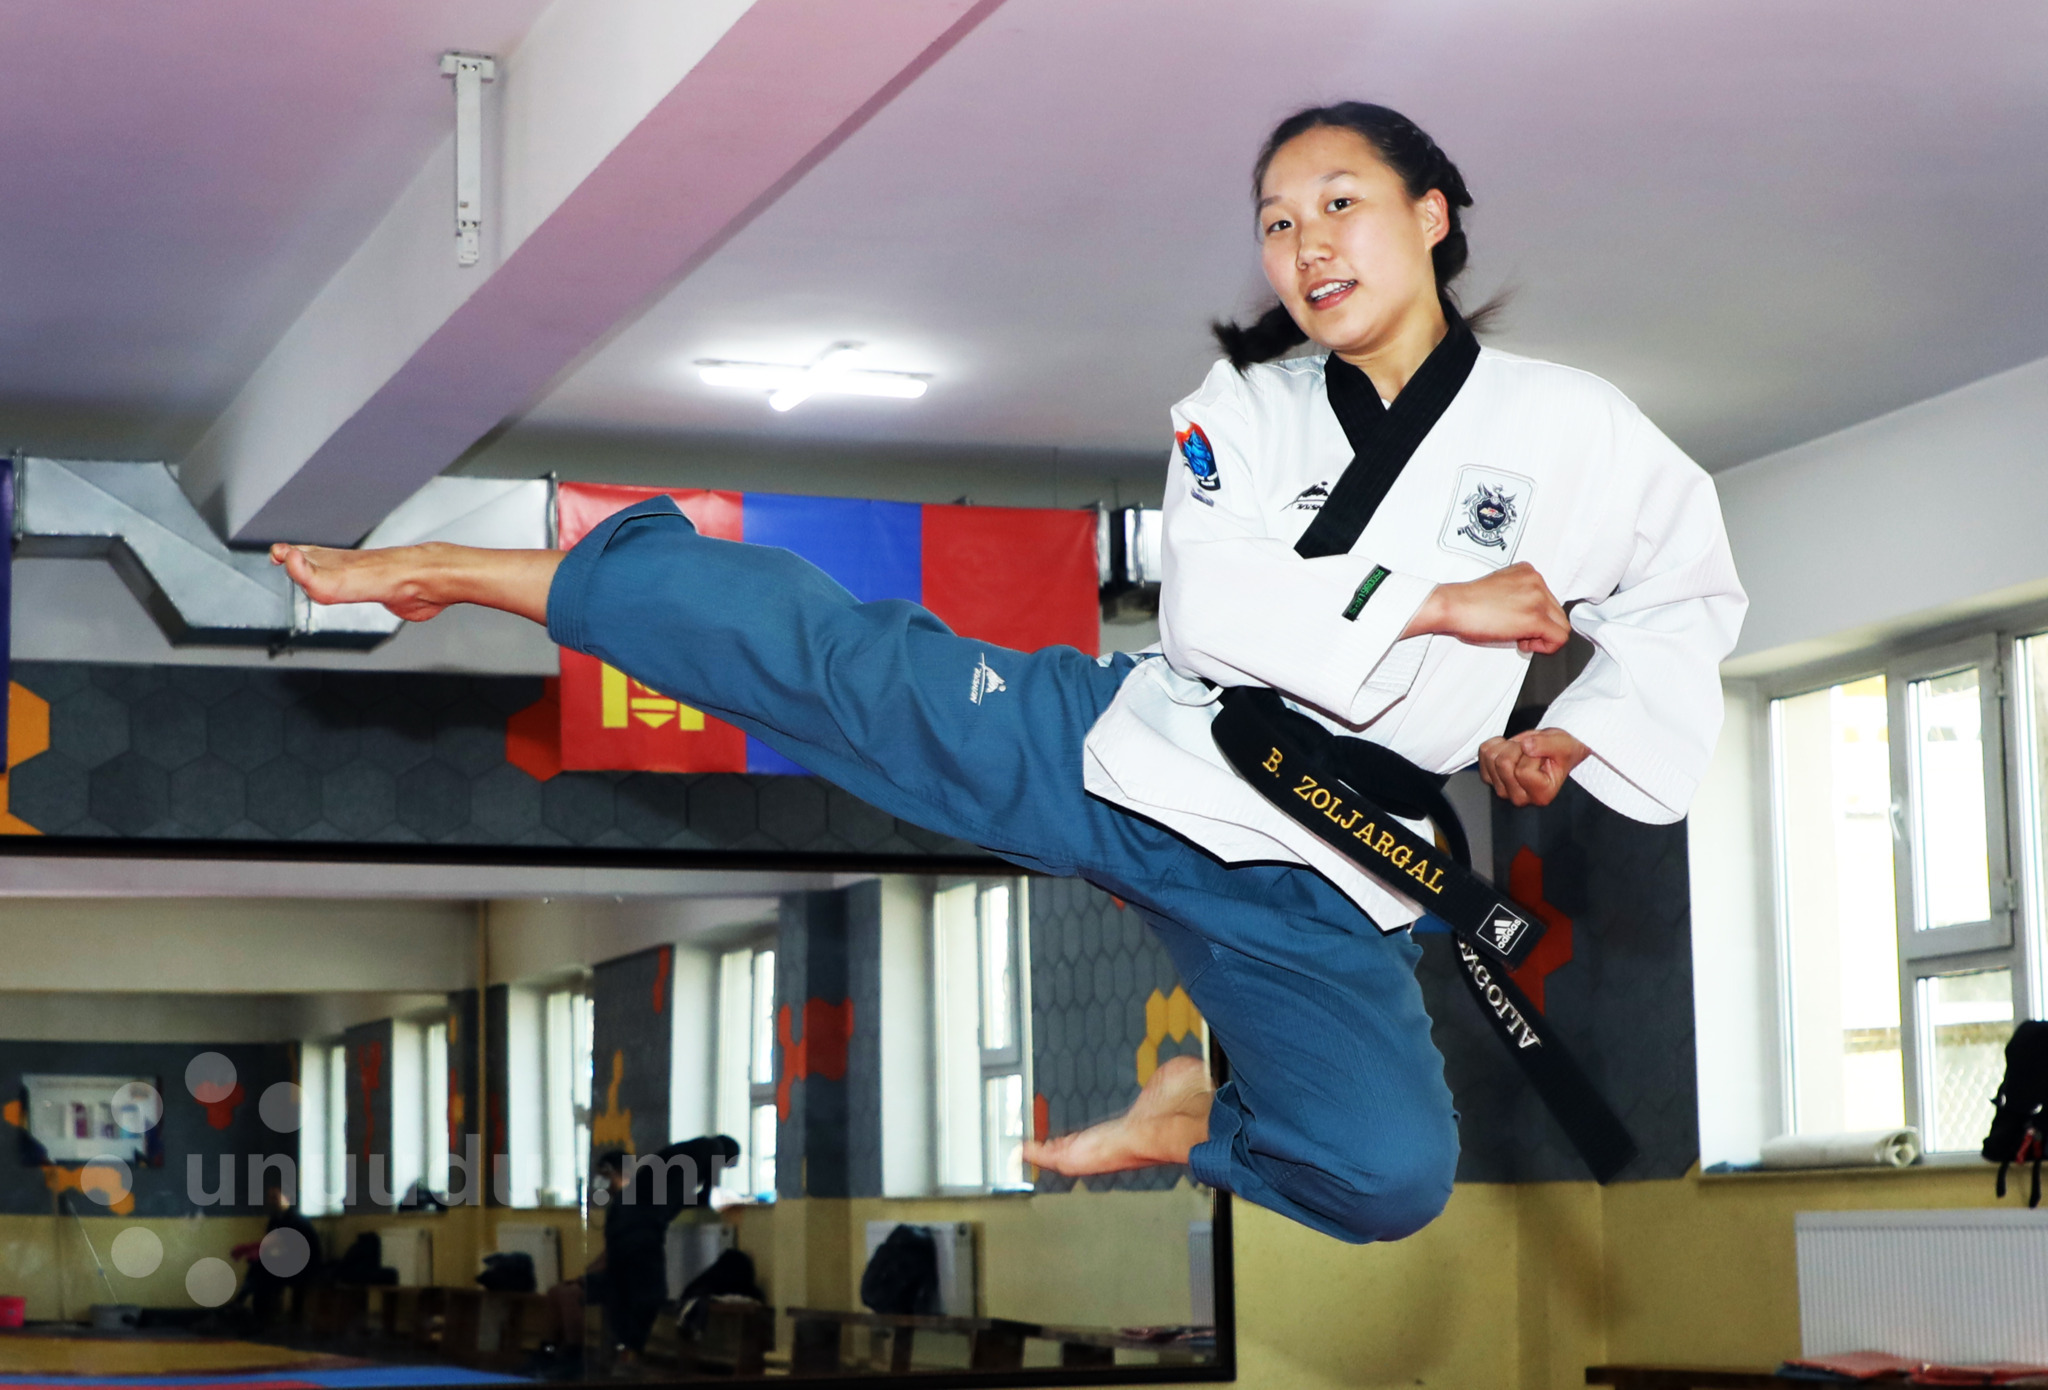 B. ZOLJARGAL: I demonstrate what I have learned from Taekwondo exclusively within the arena